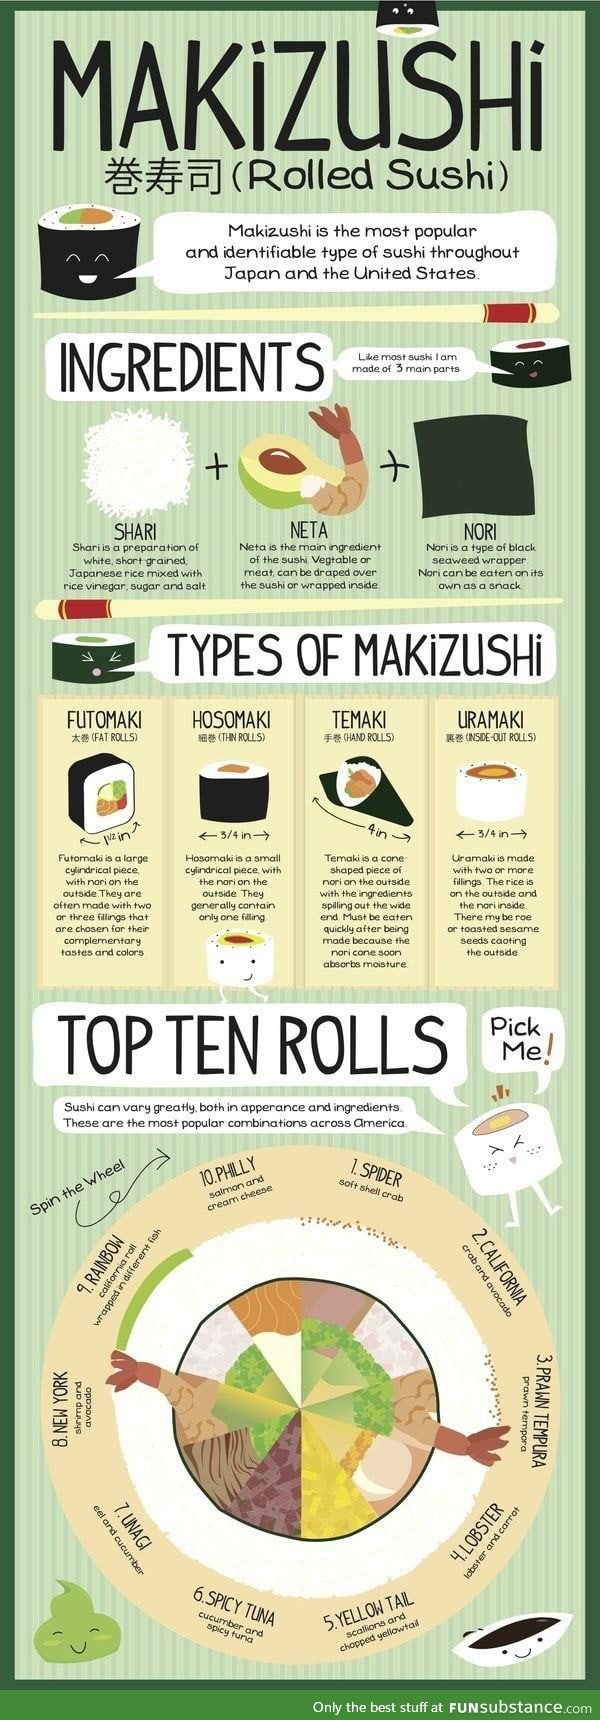 Let's learn more about sushi!